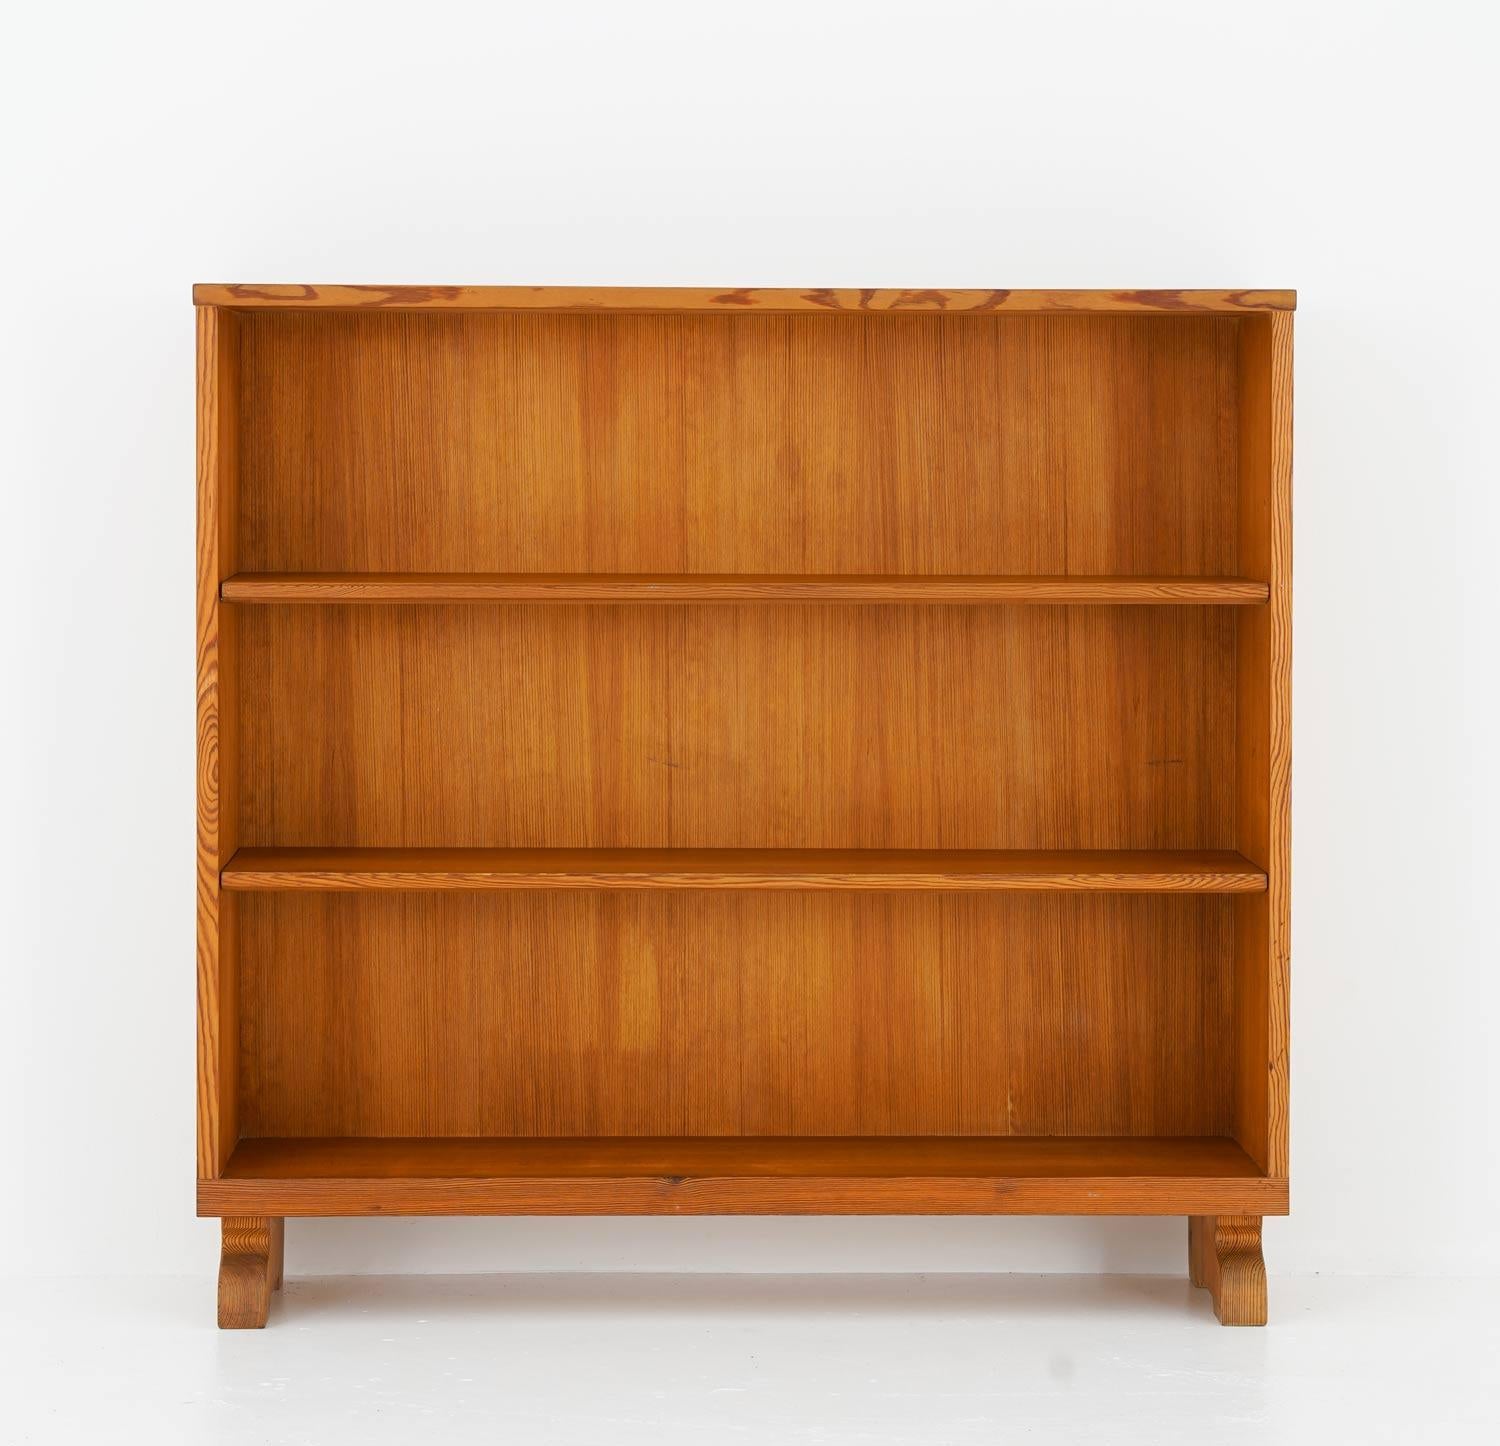 A beautiful shelf designed by Carl Malmsten, manufactured in his own studio, 1940s. 
This piece goes together well with pine furniture from other Swedish designers from the era, such as Axel Einar Hjorth.

Condition: Good original condition with